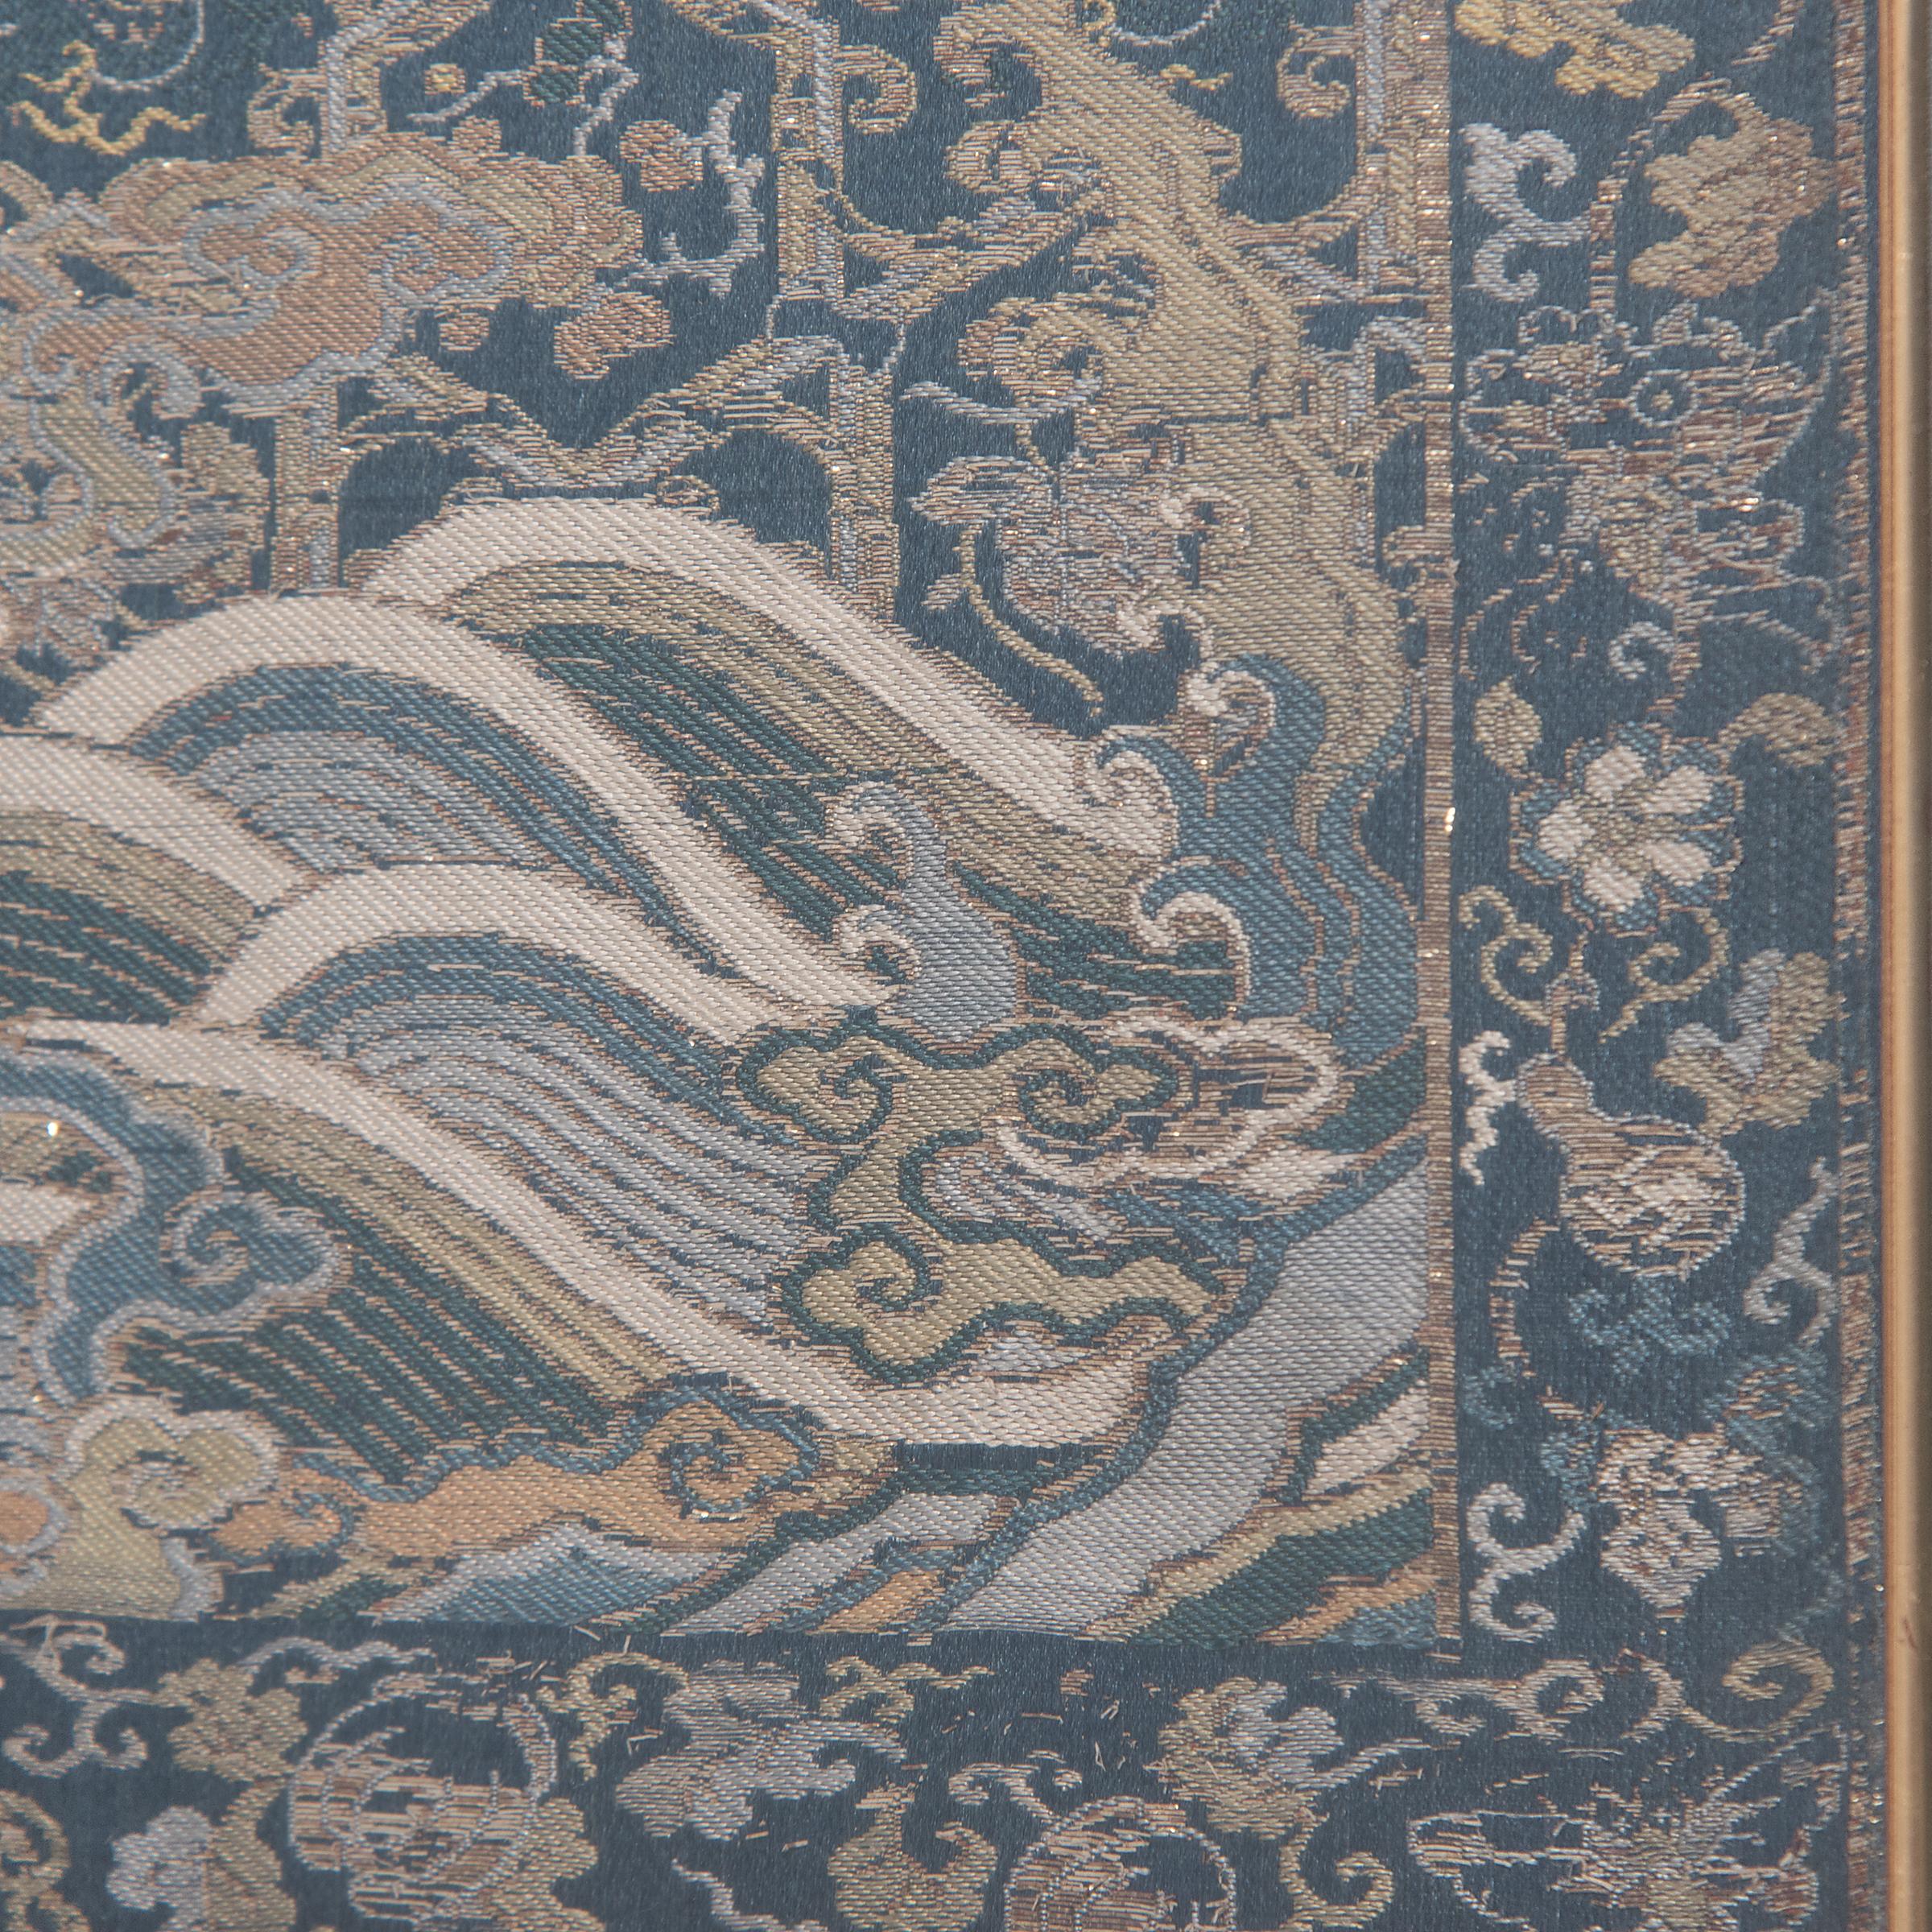 Pair of Framed Chinese Silk Brocade Chair Panels, c. 1850 In Good Condition For Sale In Chicago, IL